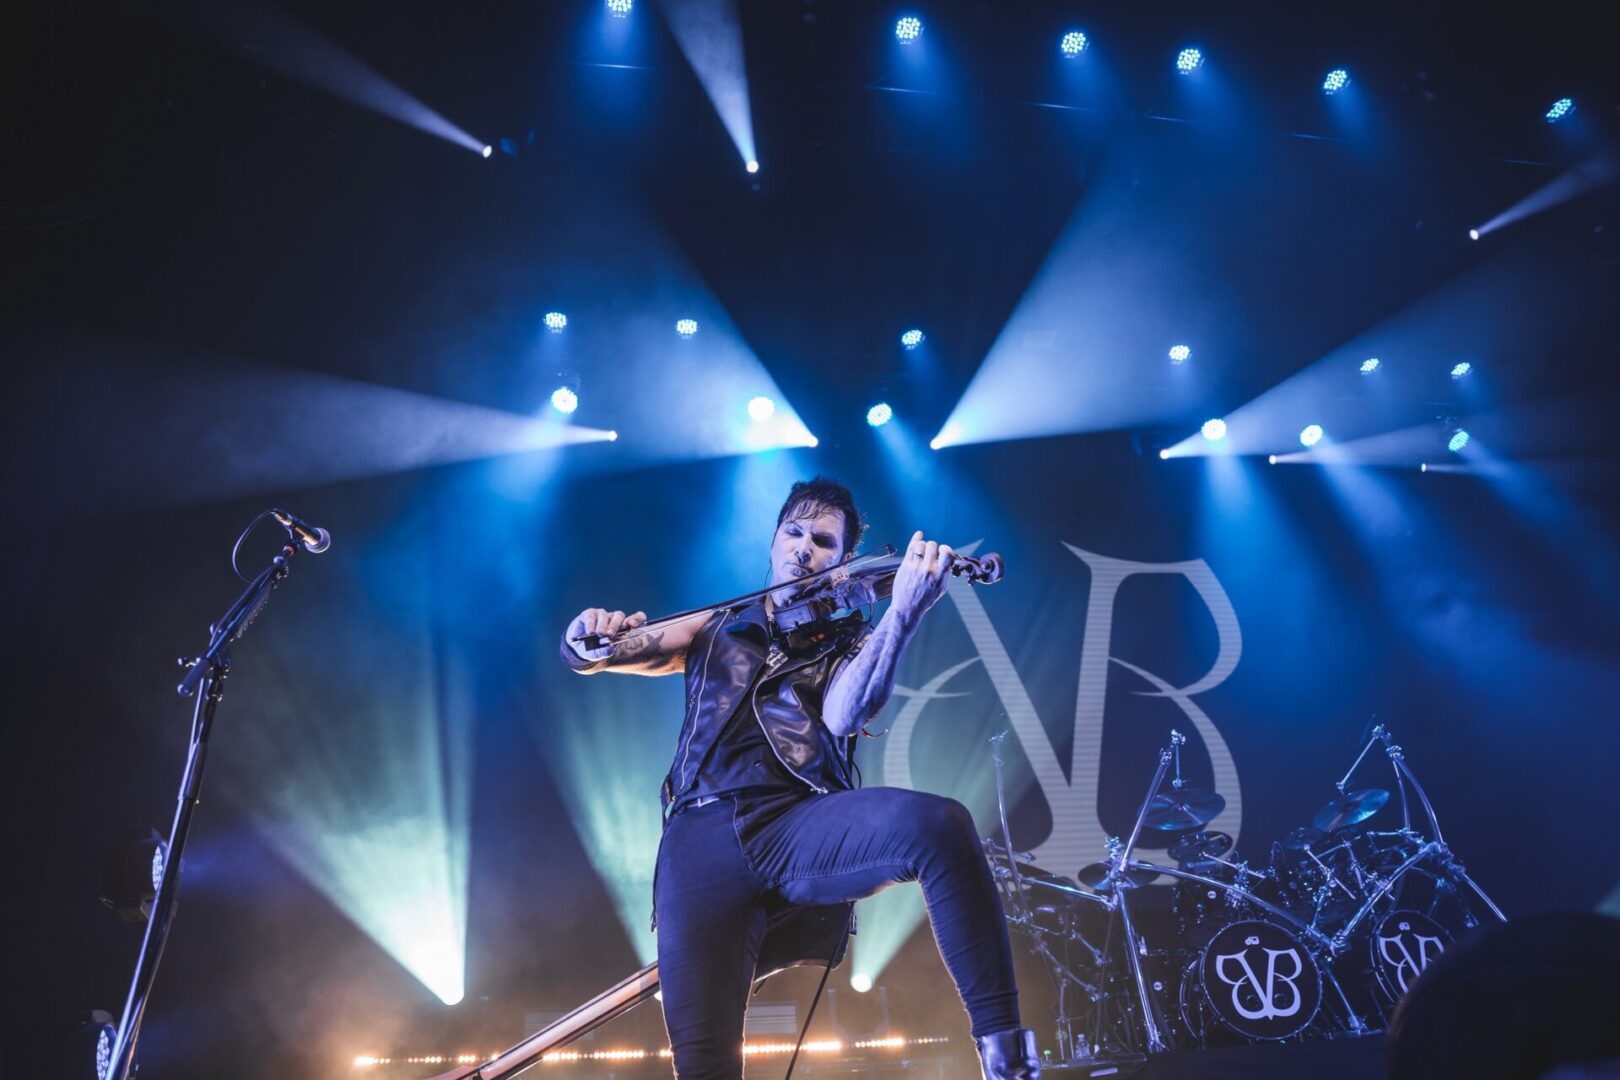 A man playing a violin on stage during the Black Veil Brides Tour.